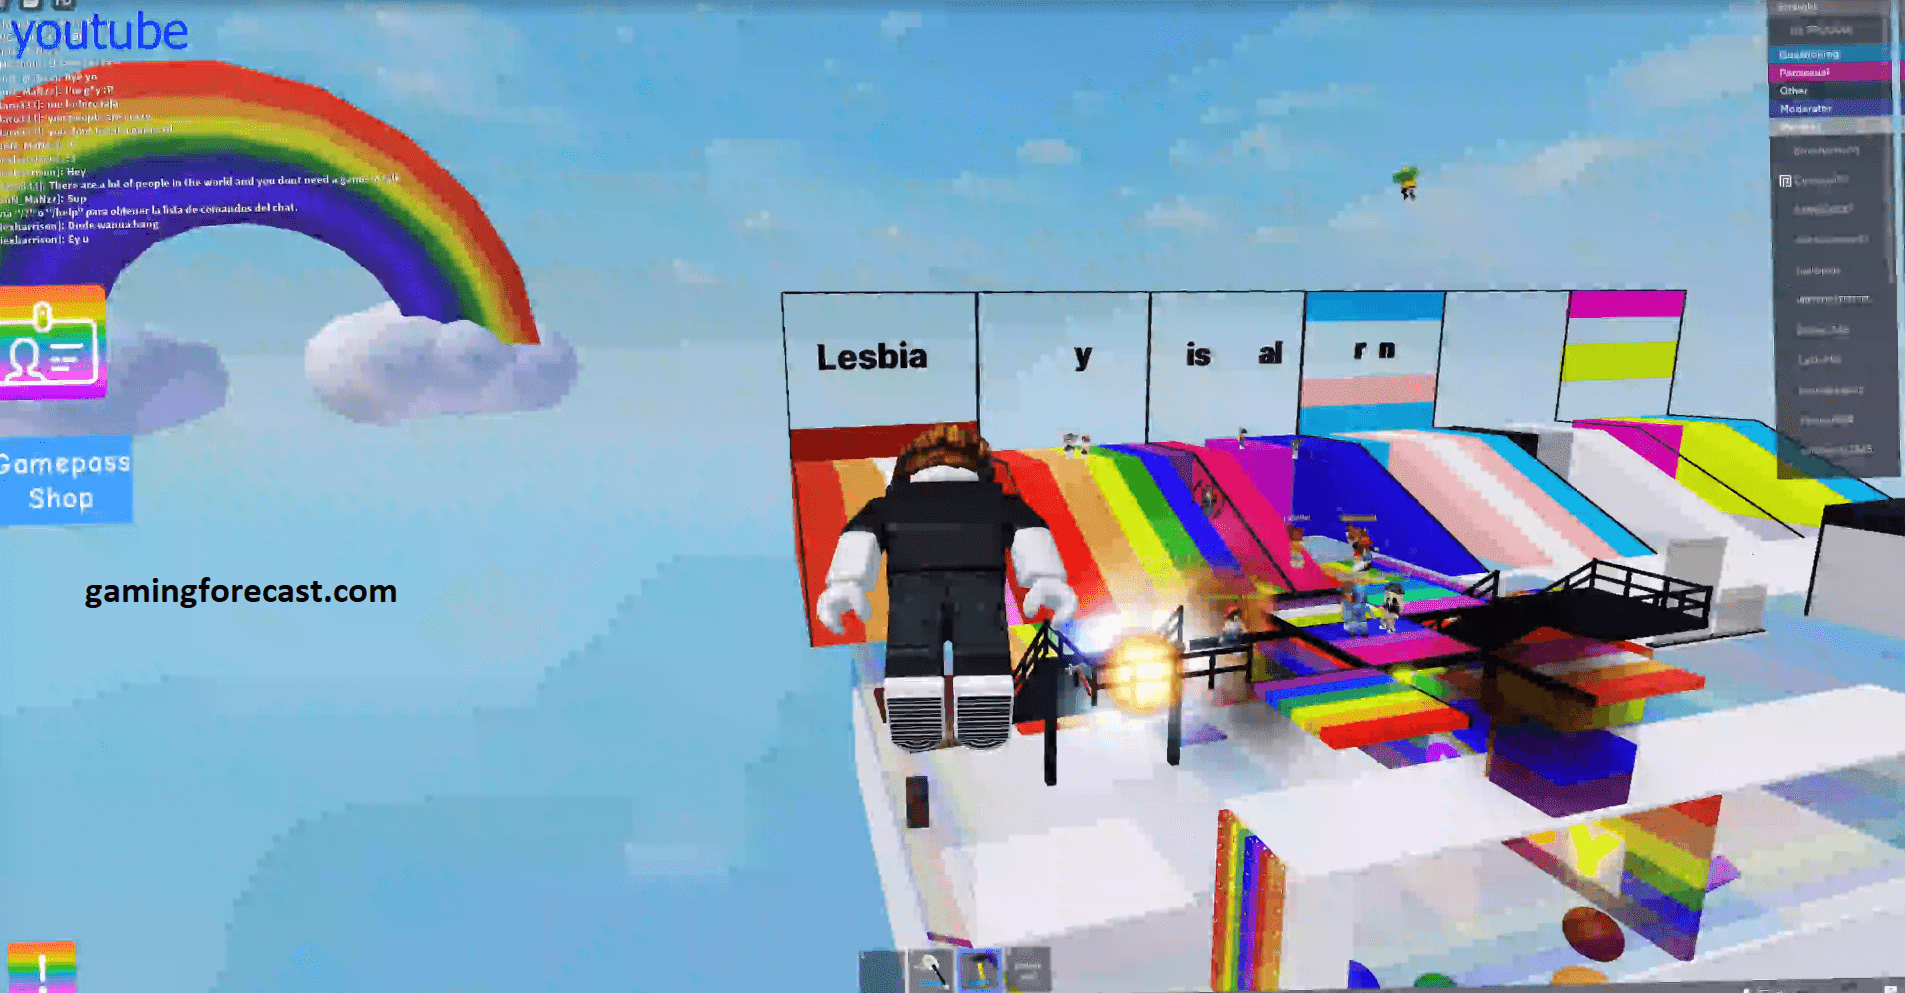 Roblox Hack Download Pc Destroy Lobby Fly Aimbot Scripts 2021 Gaming Forecast Download Free Online Game Hacks - how to exploit a long roblox naem